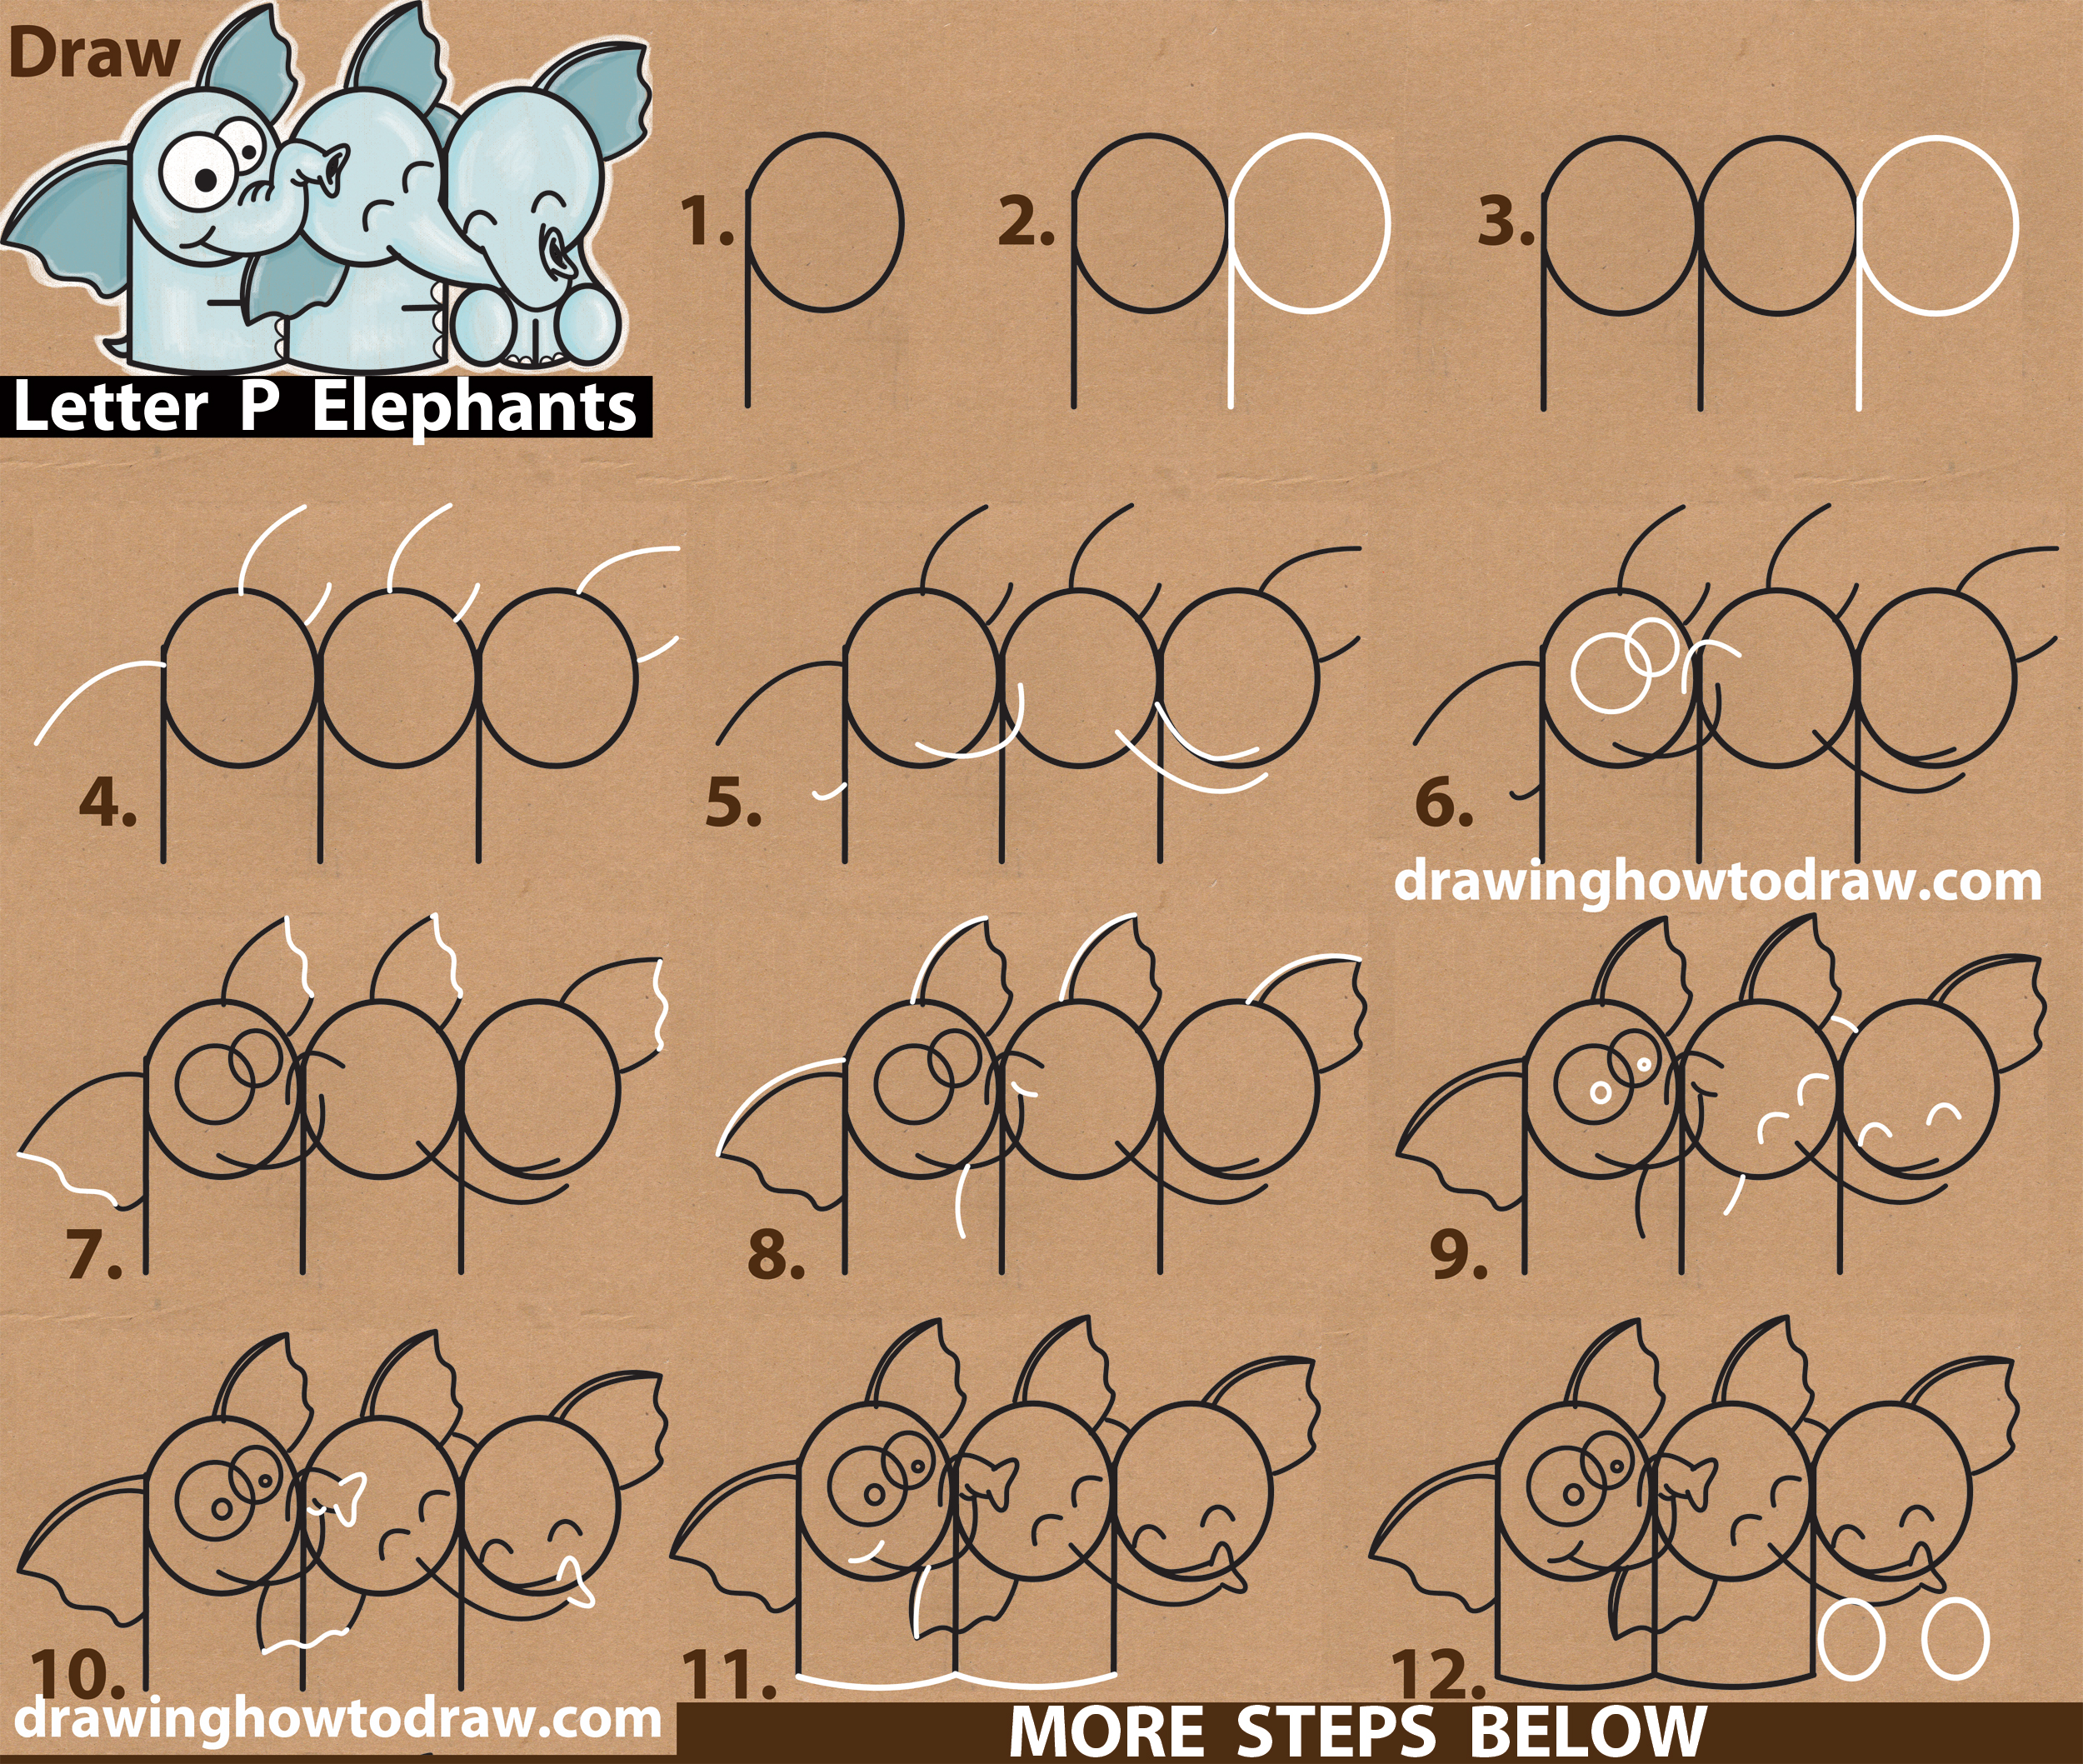 How to Draw Cute Cartoon Elephants Hugging from Letter 'P' Shapes - Easy Step by Step Drawing Tutorial for Kids